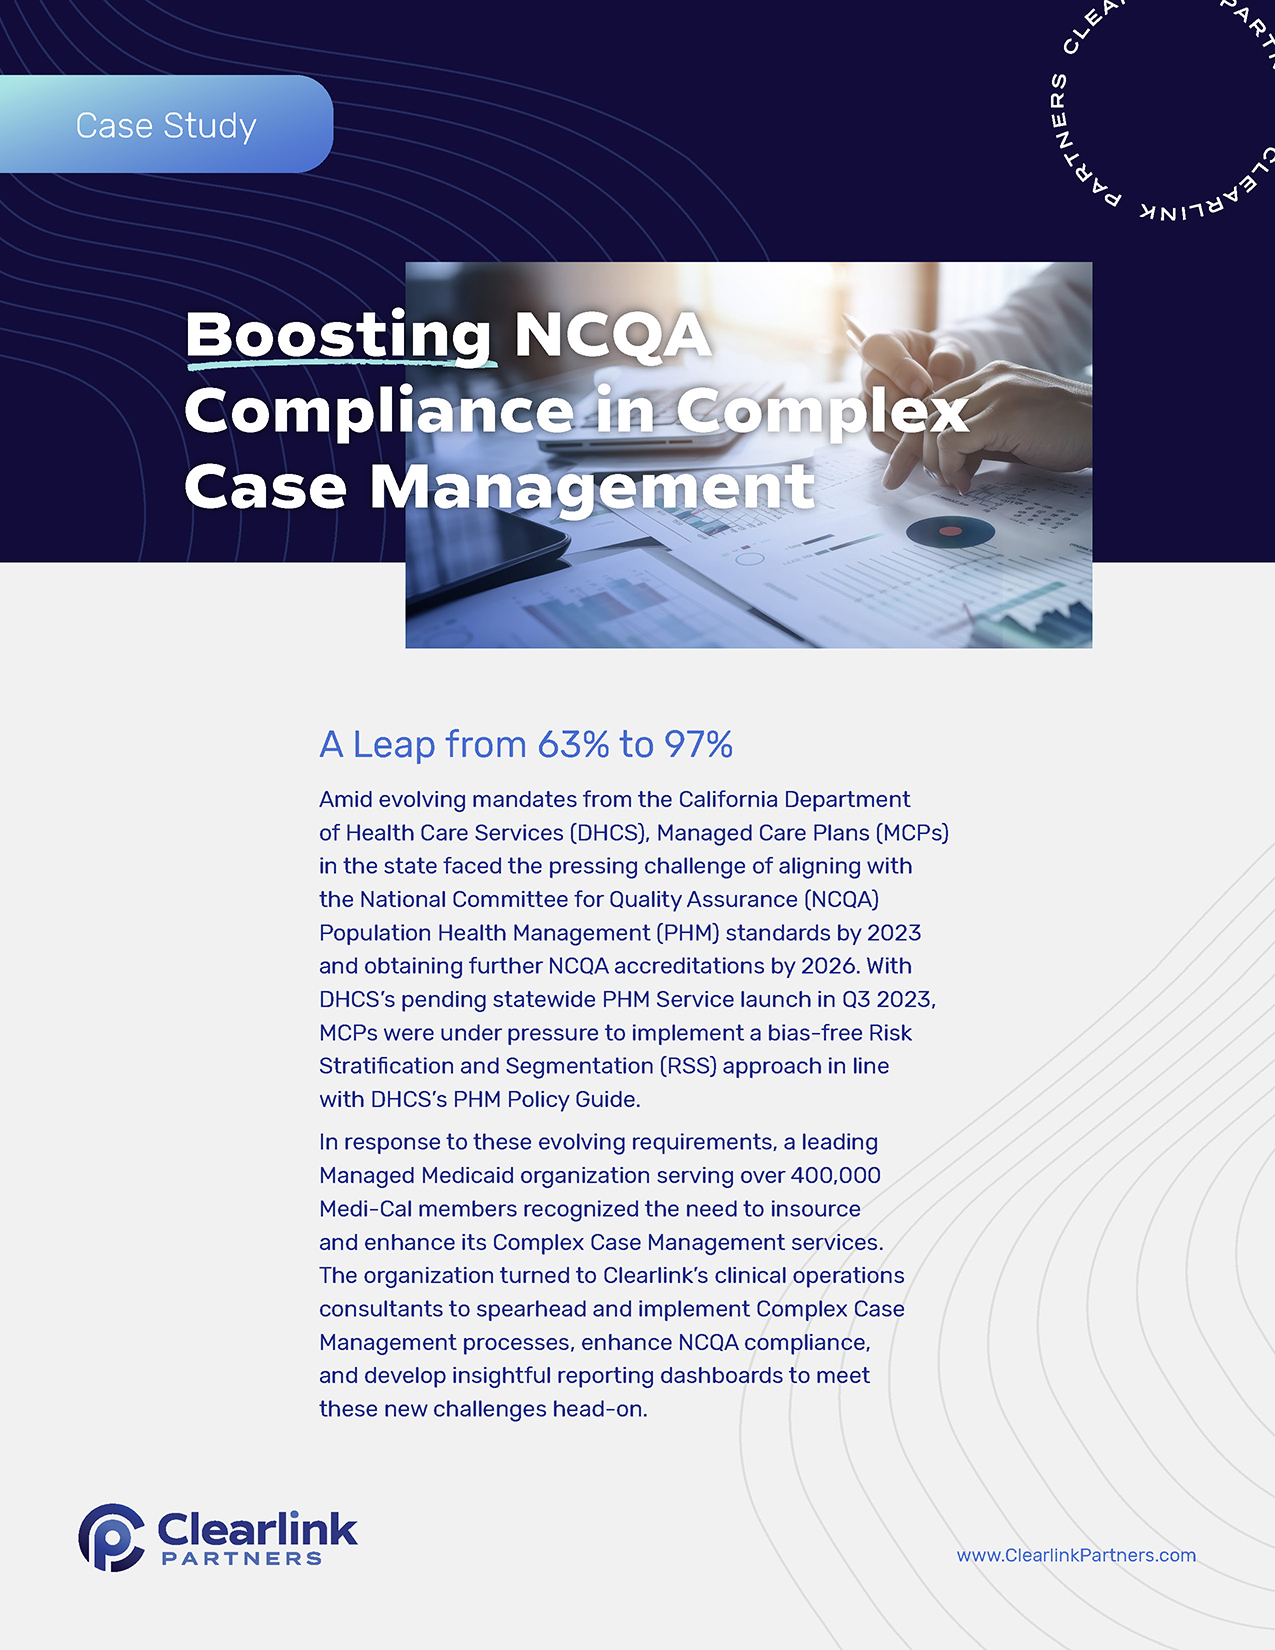 Boosting NCQA Compliance in Complex Case Management